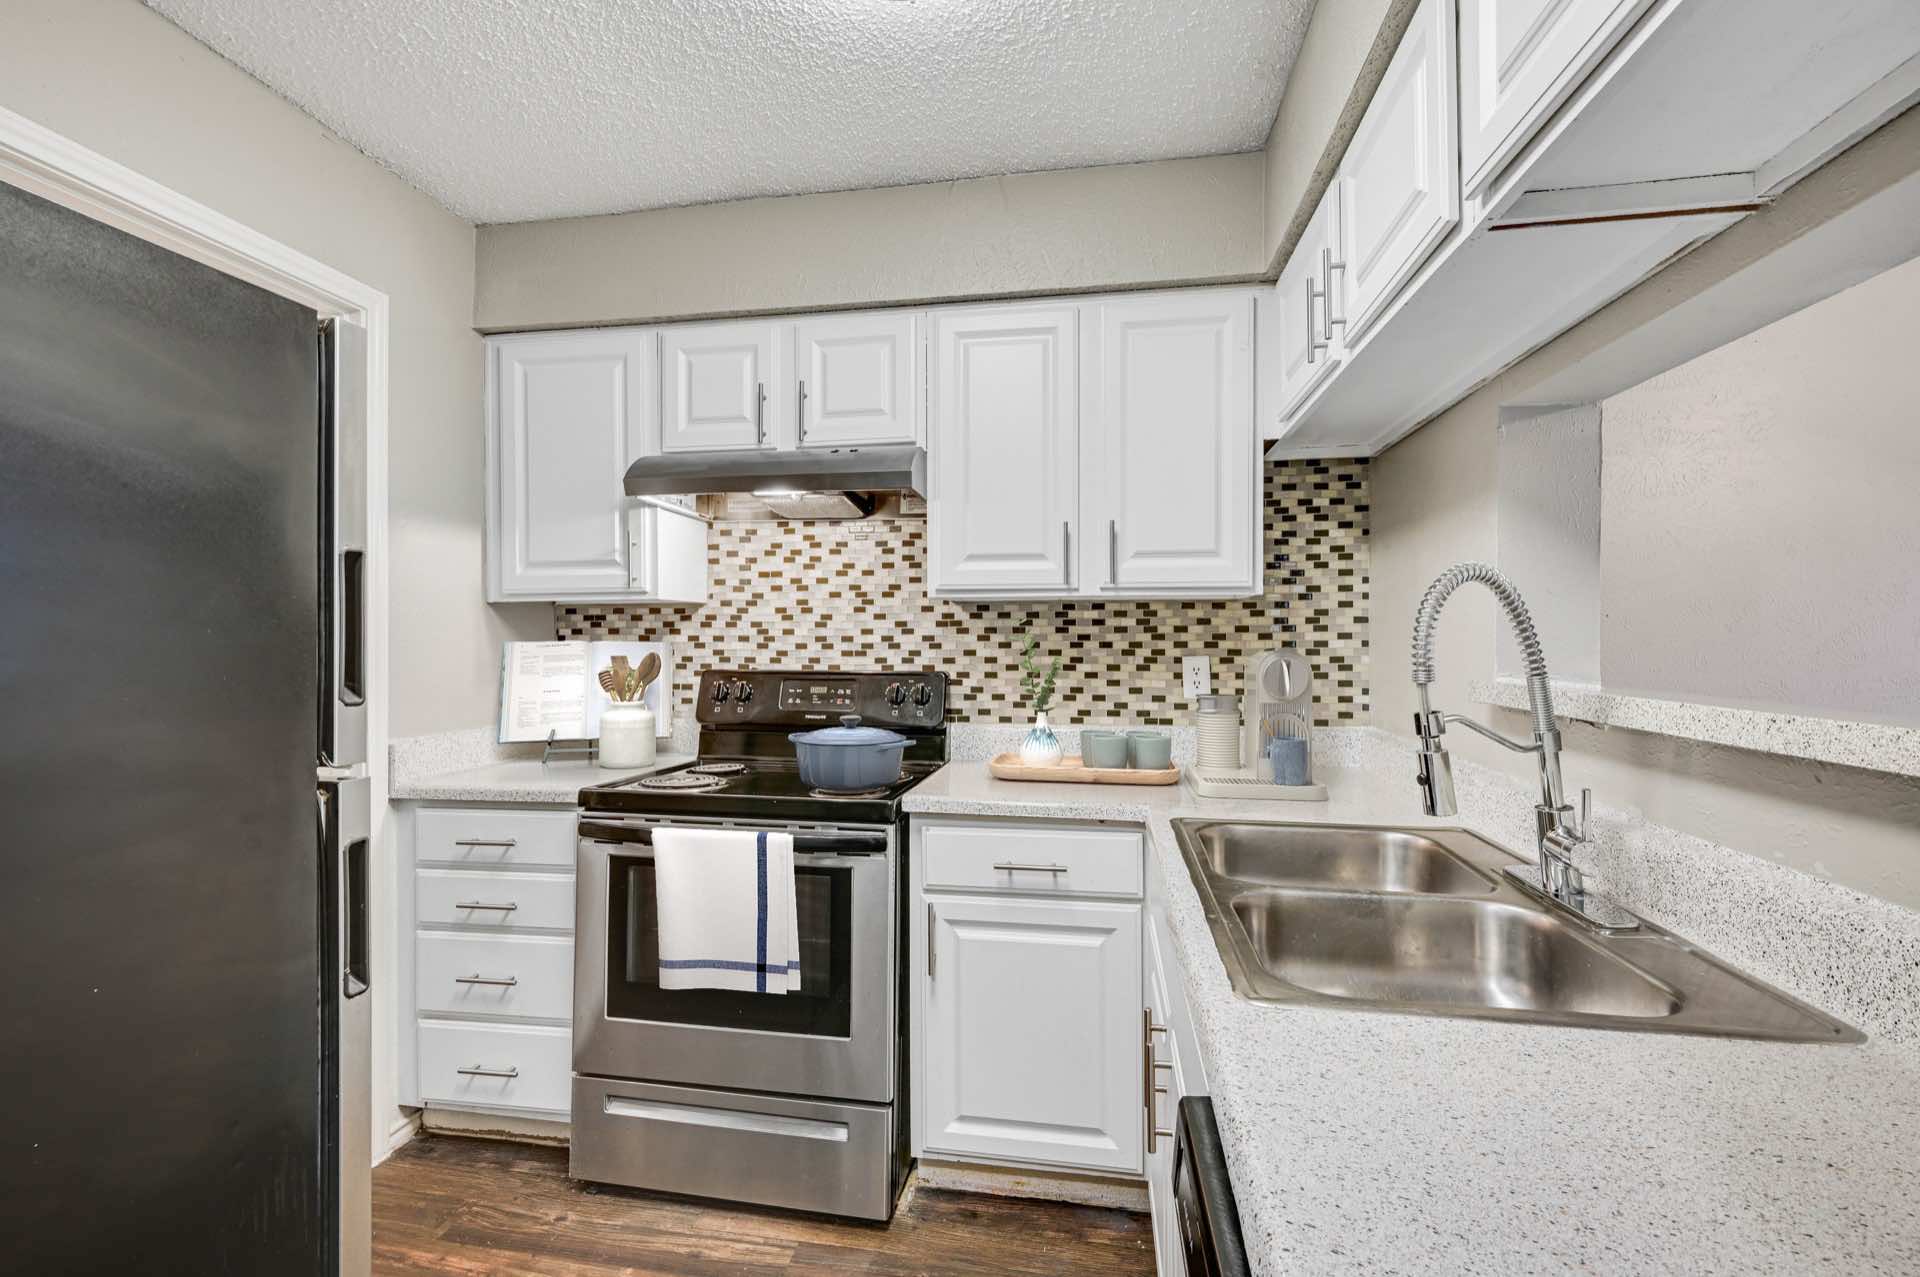 Full kitchen with stainless steal appliances